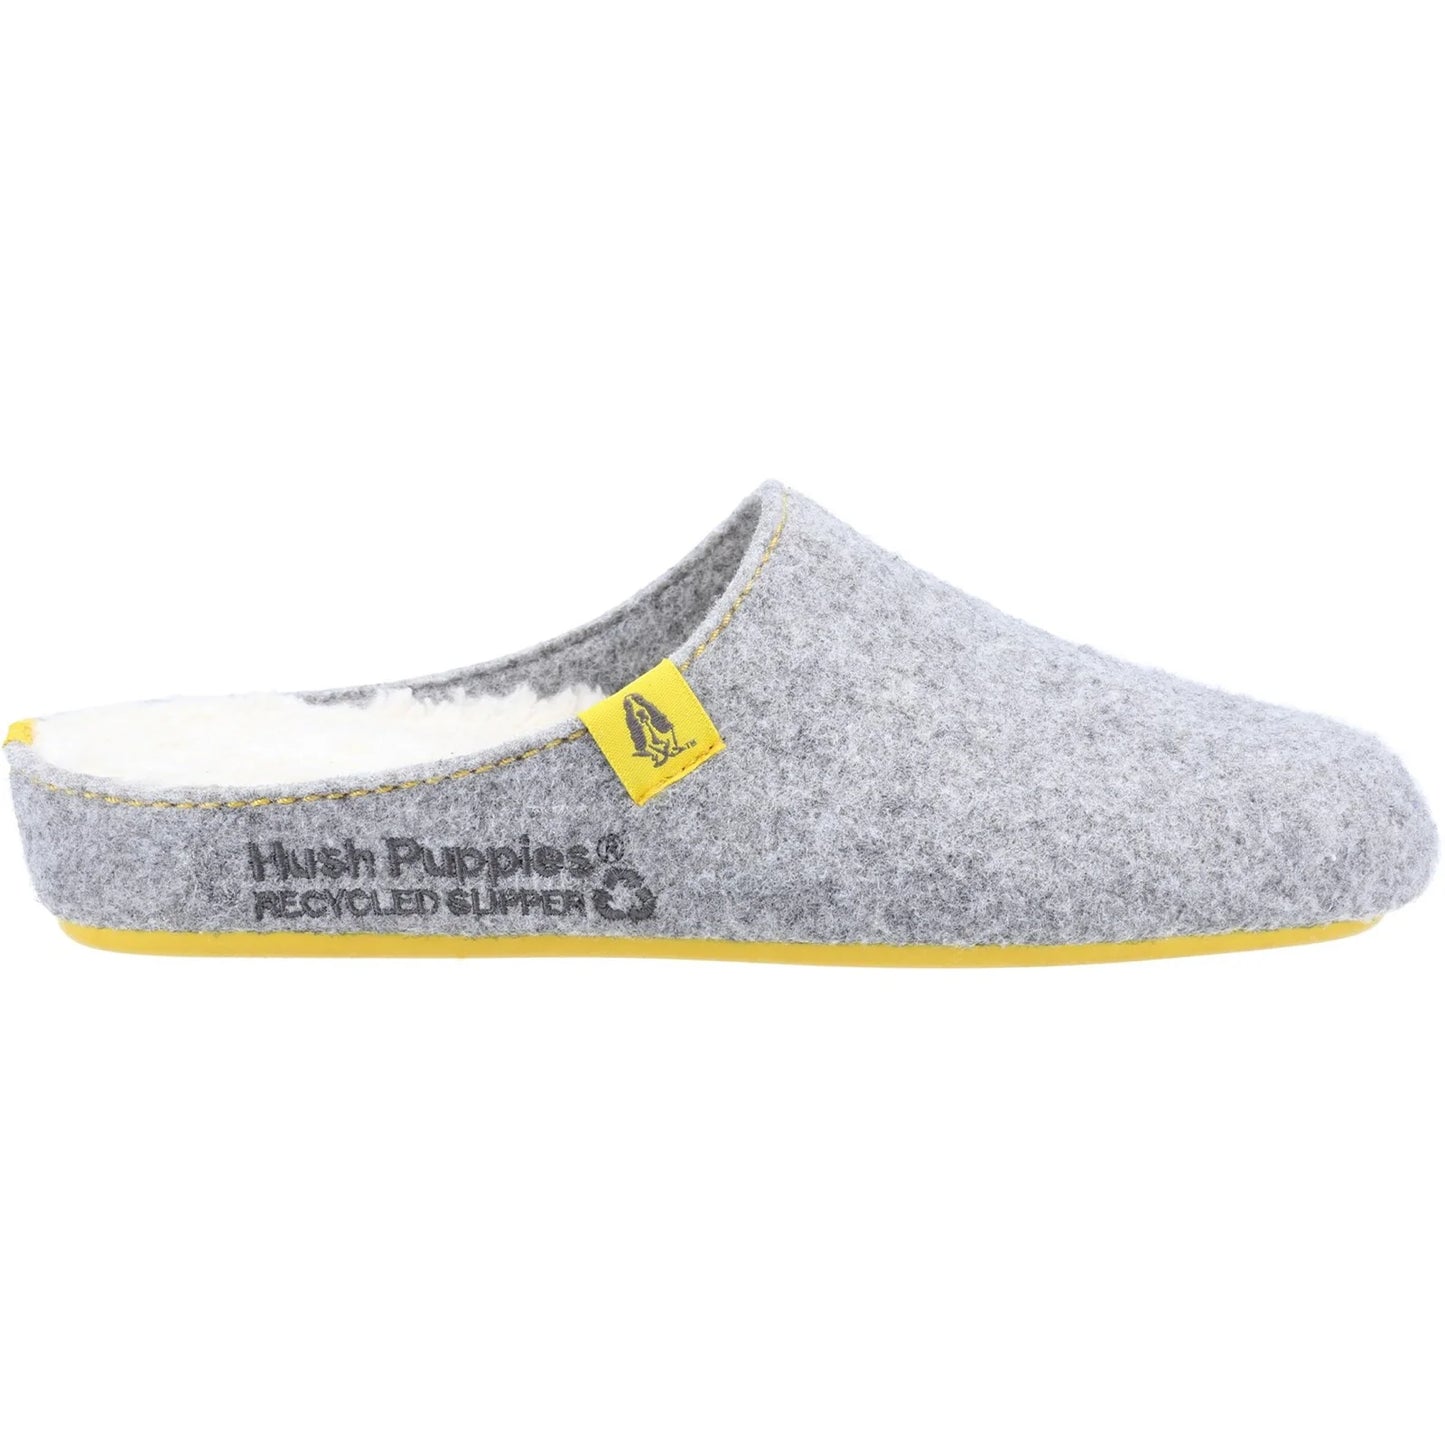 Hush Puppies Women's Recycled The Good Slipper Grey